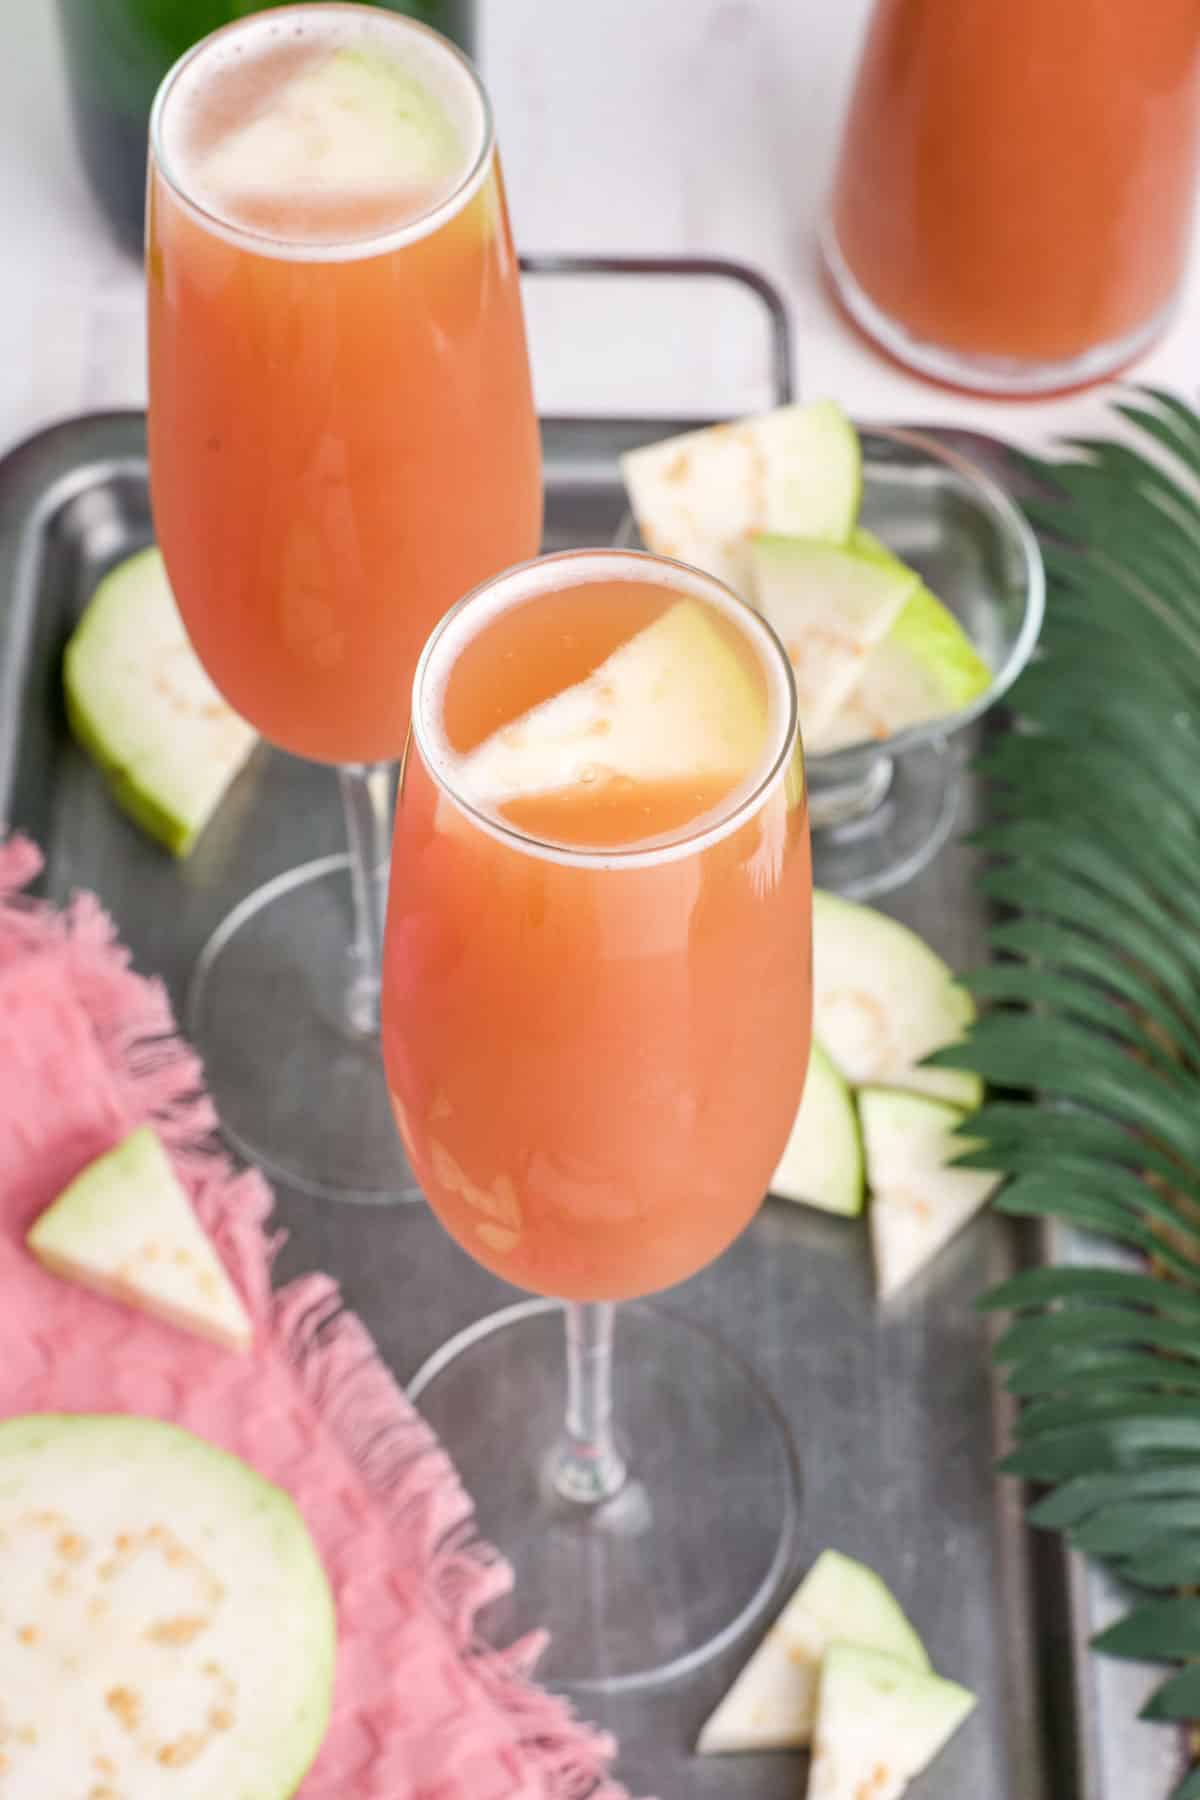 Guava mimosas on the table garnished with fresh guava.